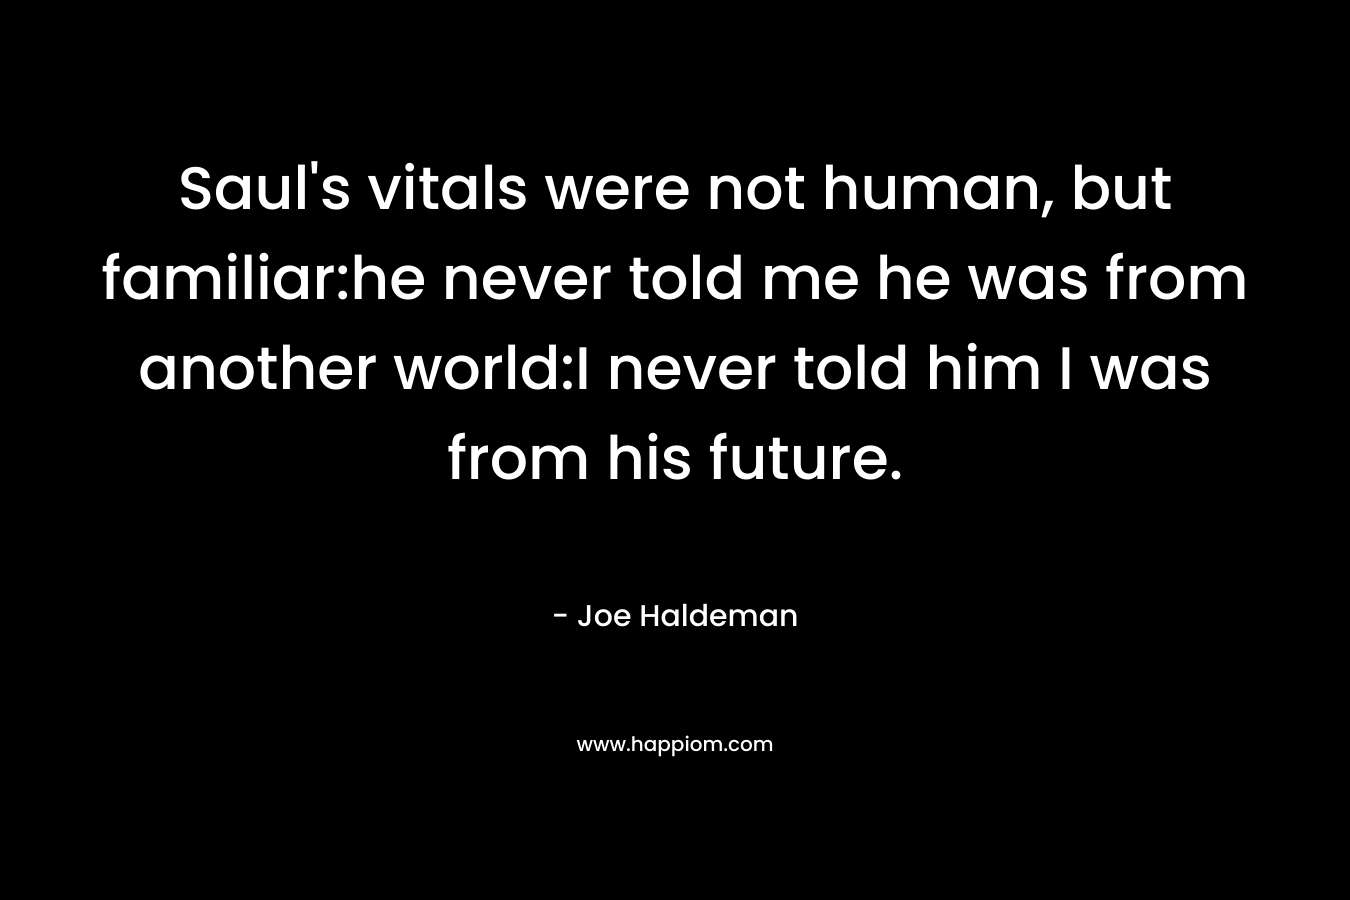 Saul's vitals were not human, but familiar:he never told me he was from another world:I never told him I was from his future. 